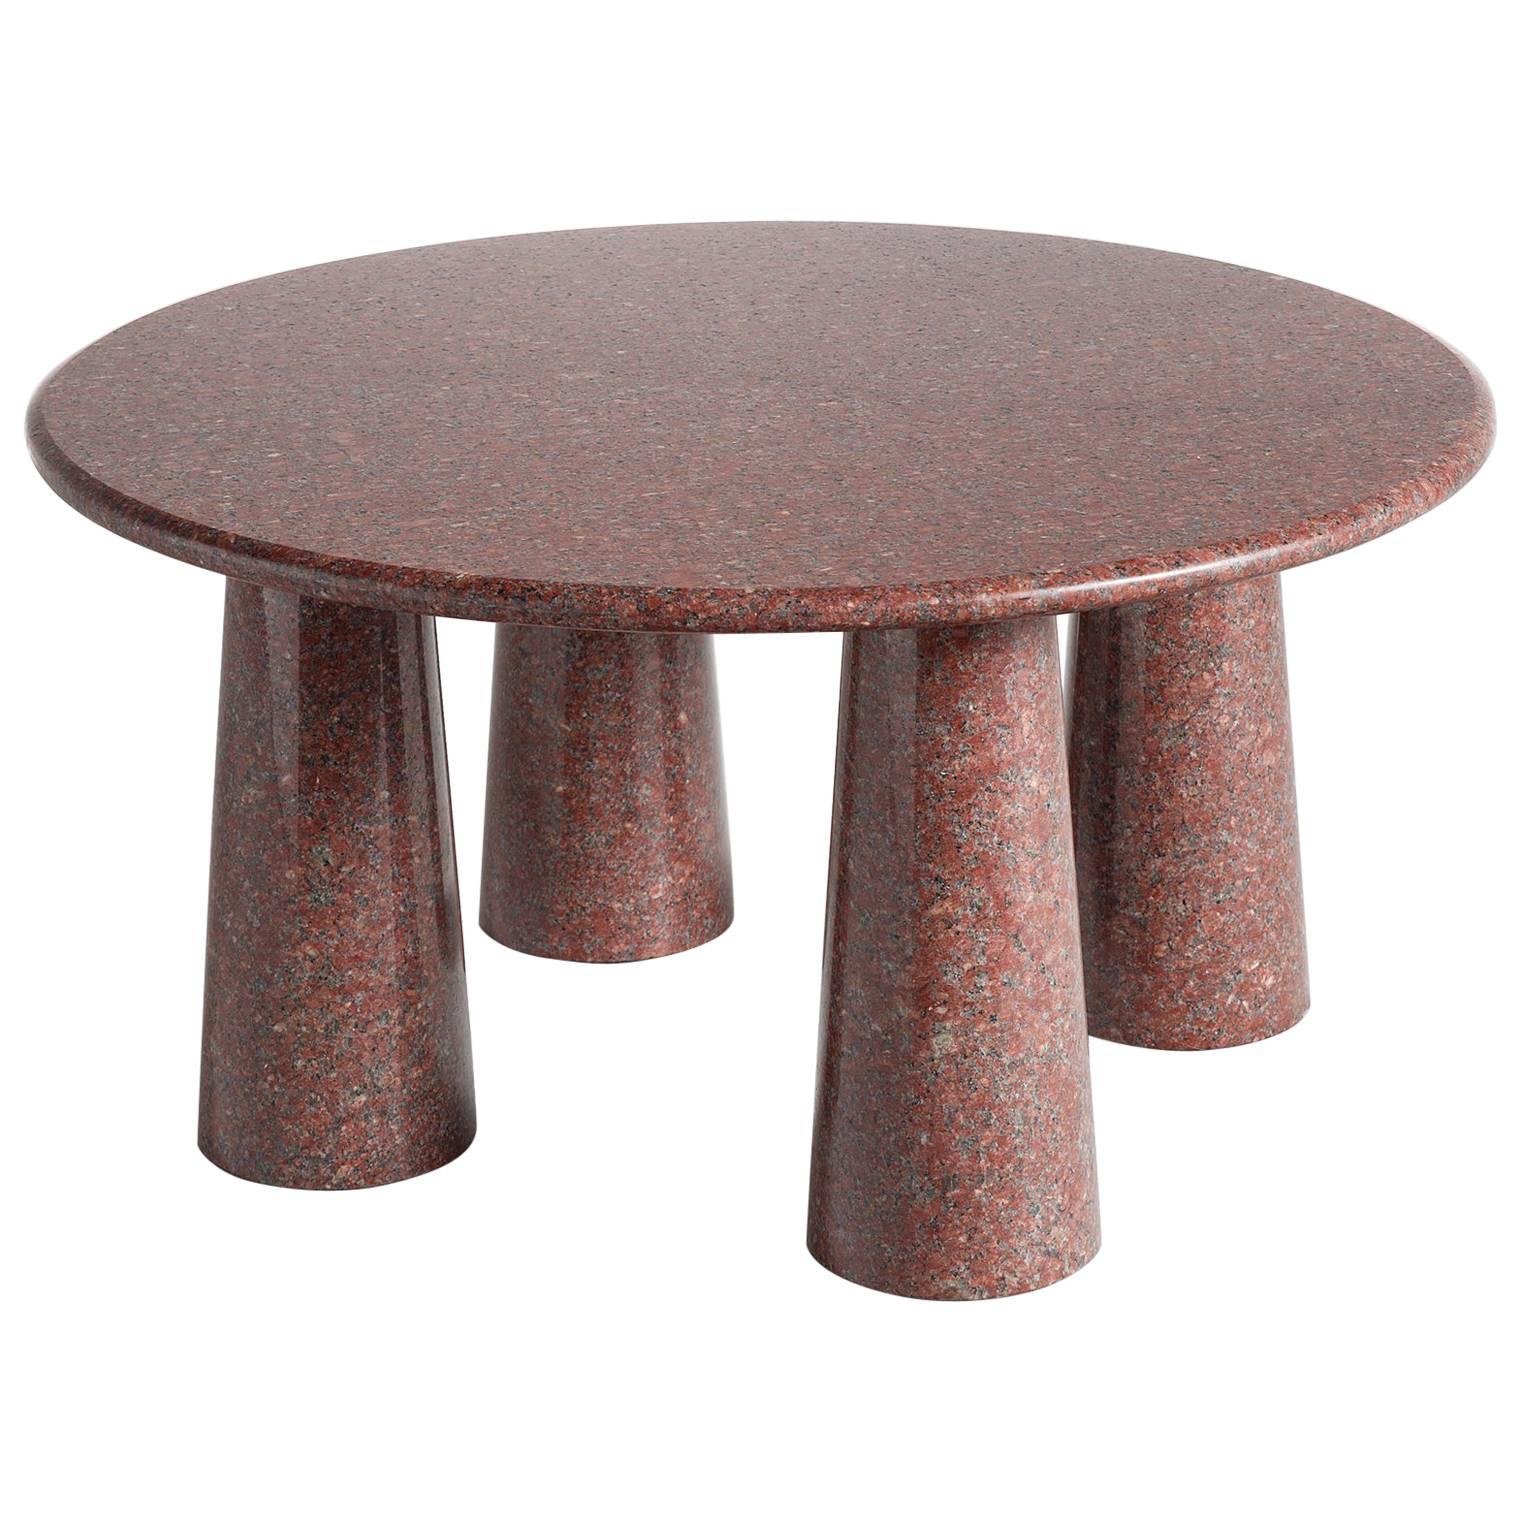 Architectural Stone Coffee Table in Balmoral Red